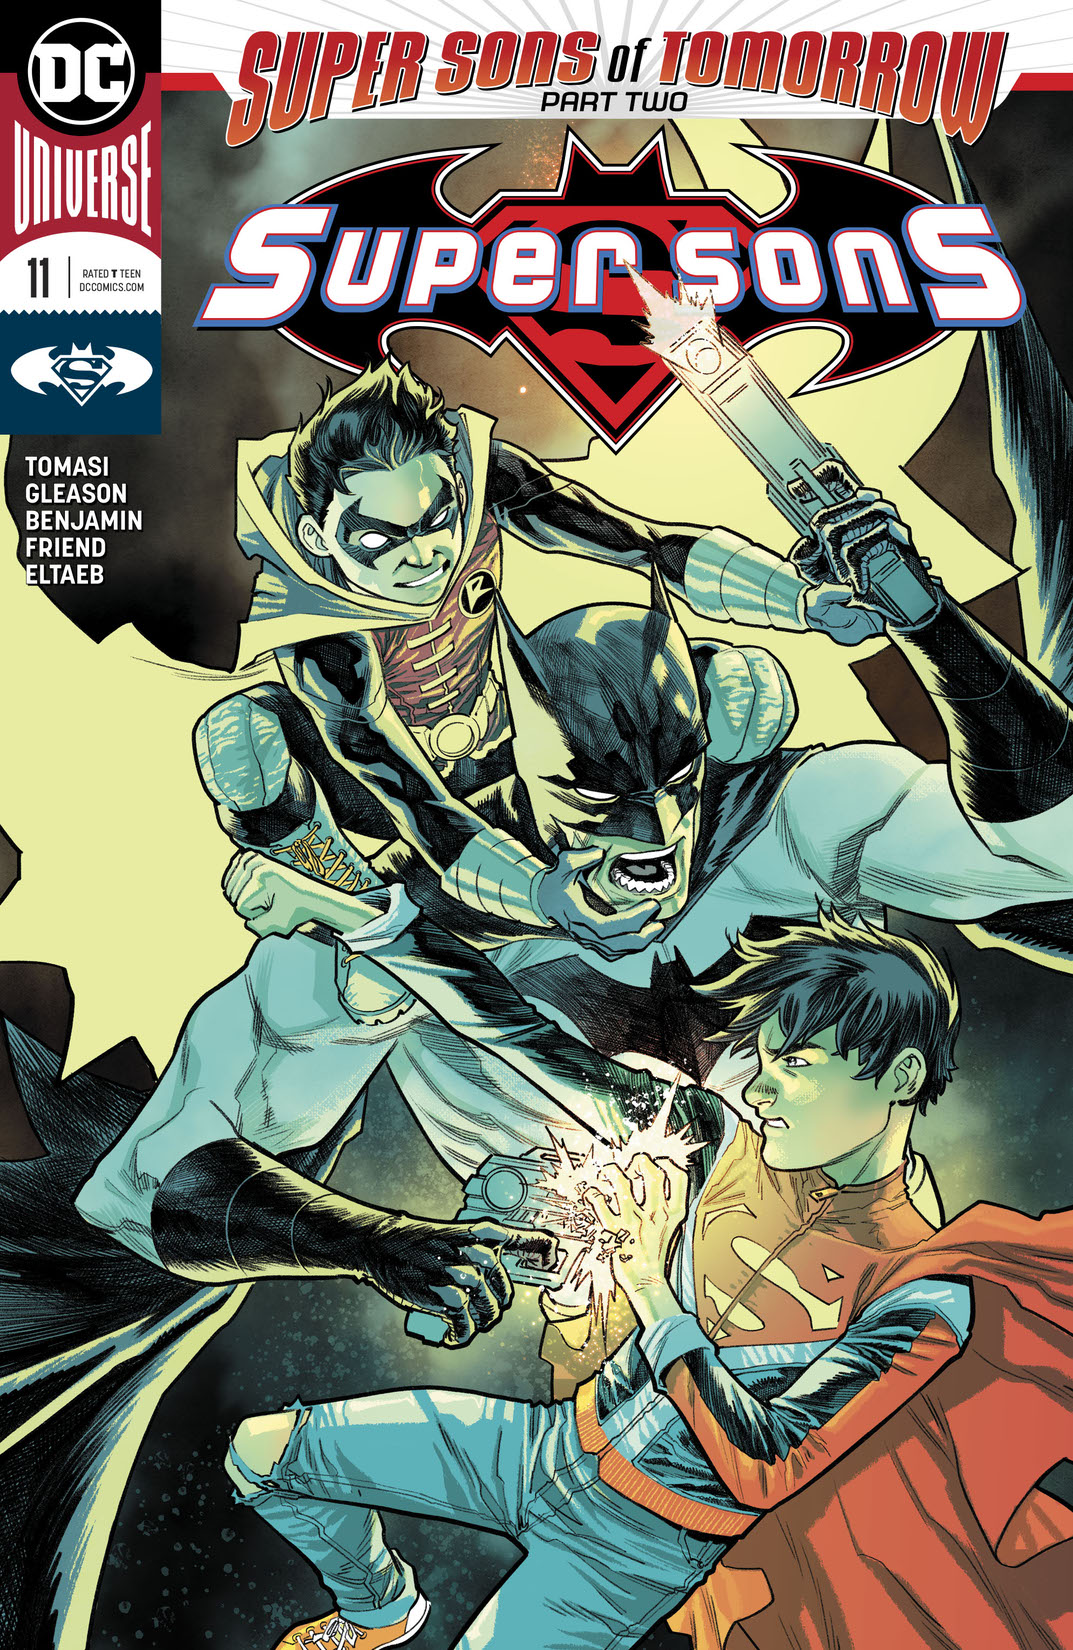 Super Sons (2017-) #11 preview images